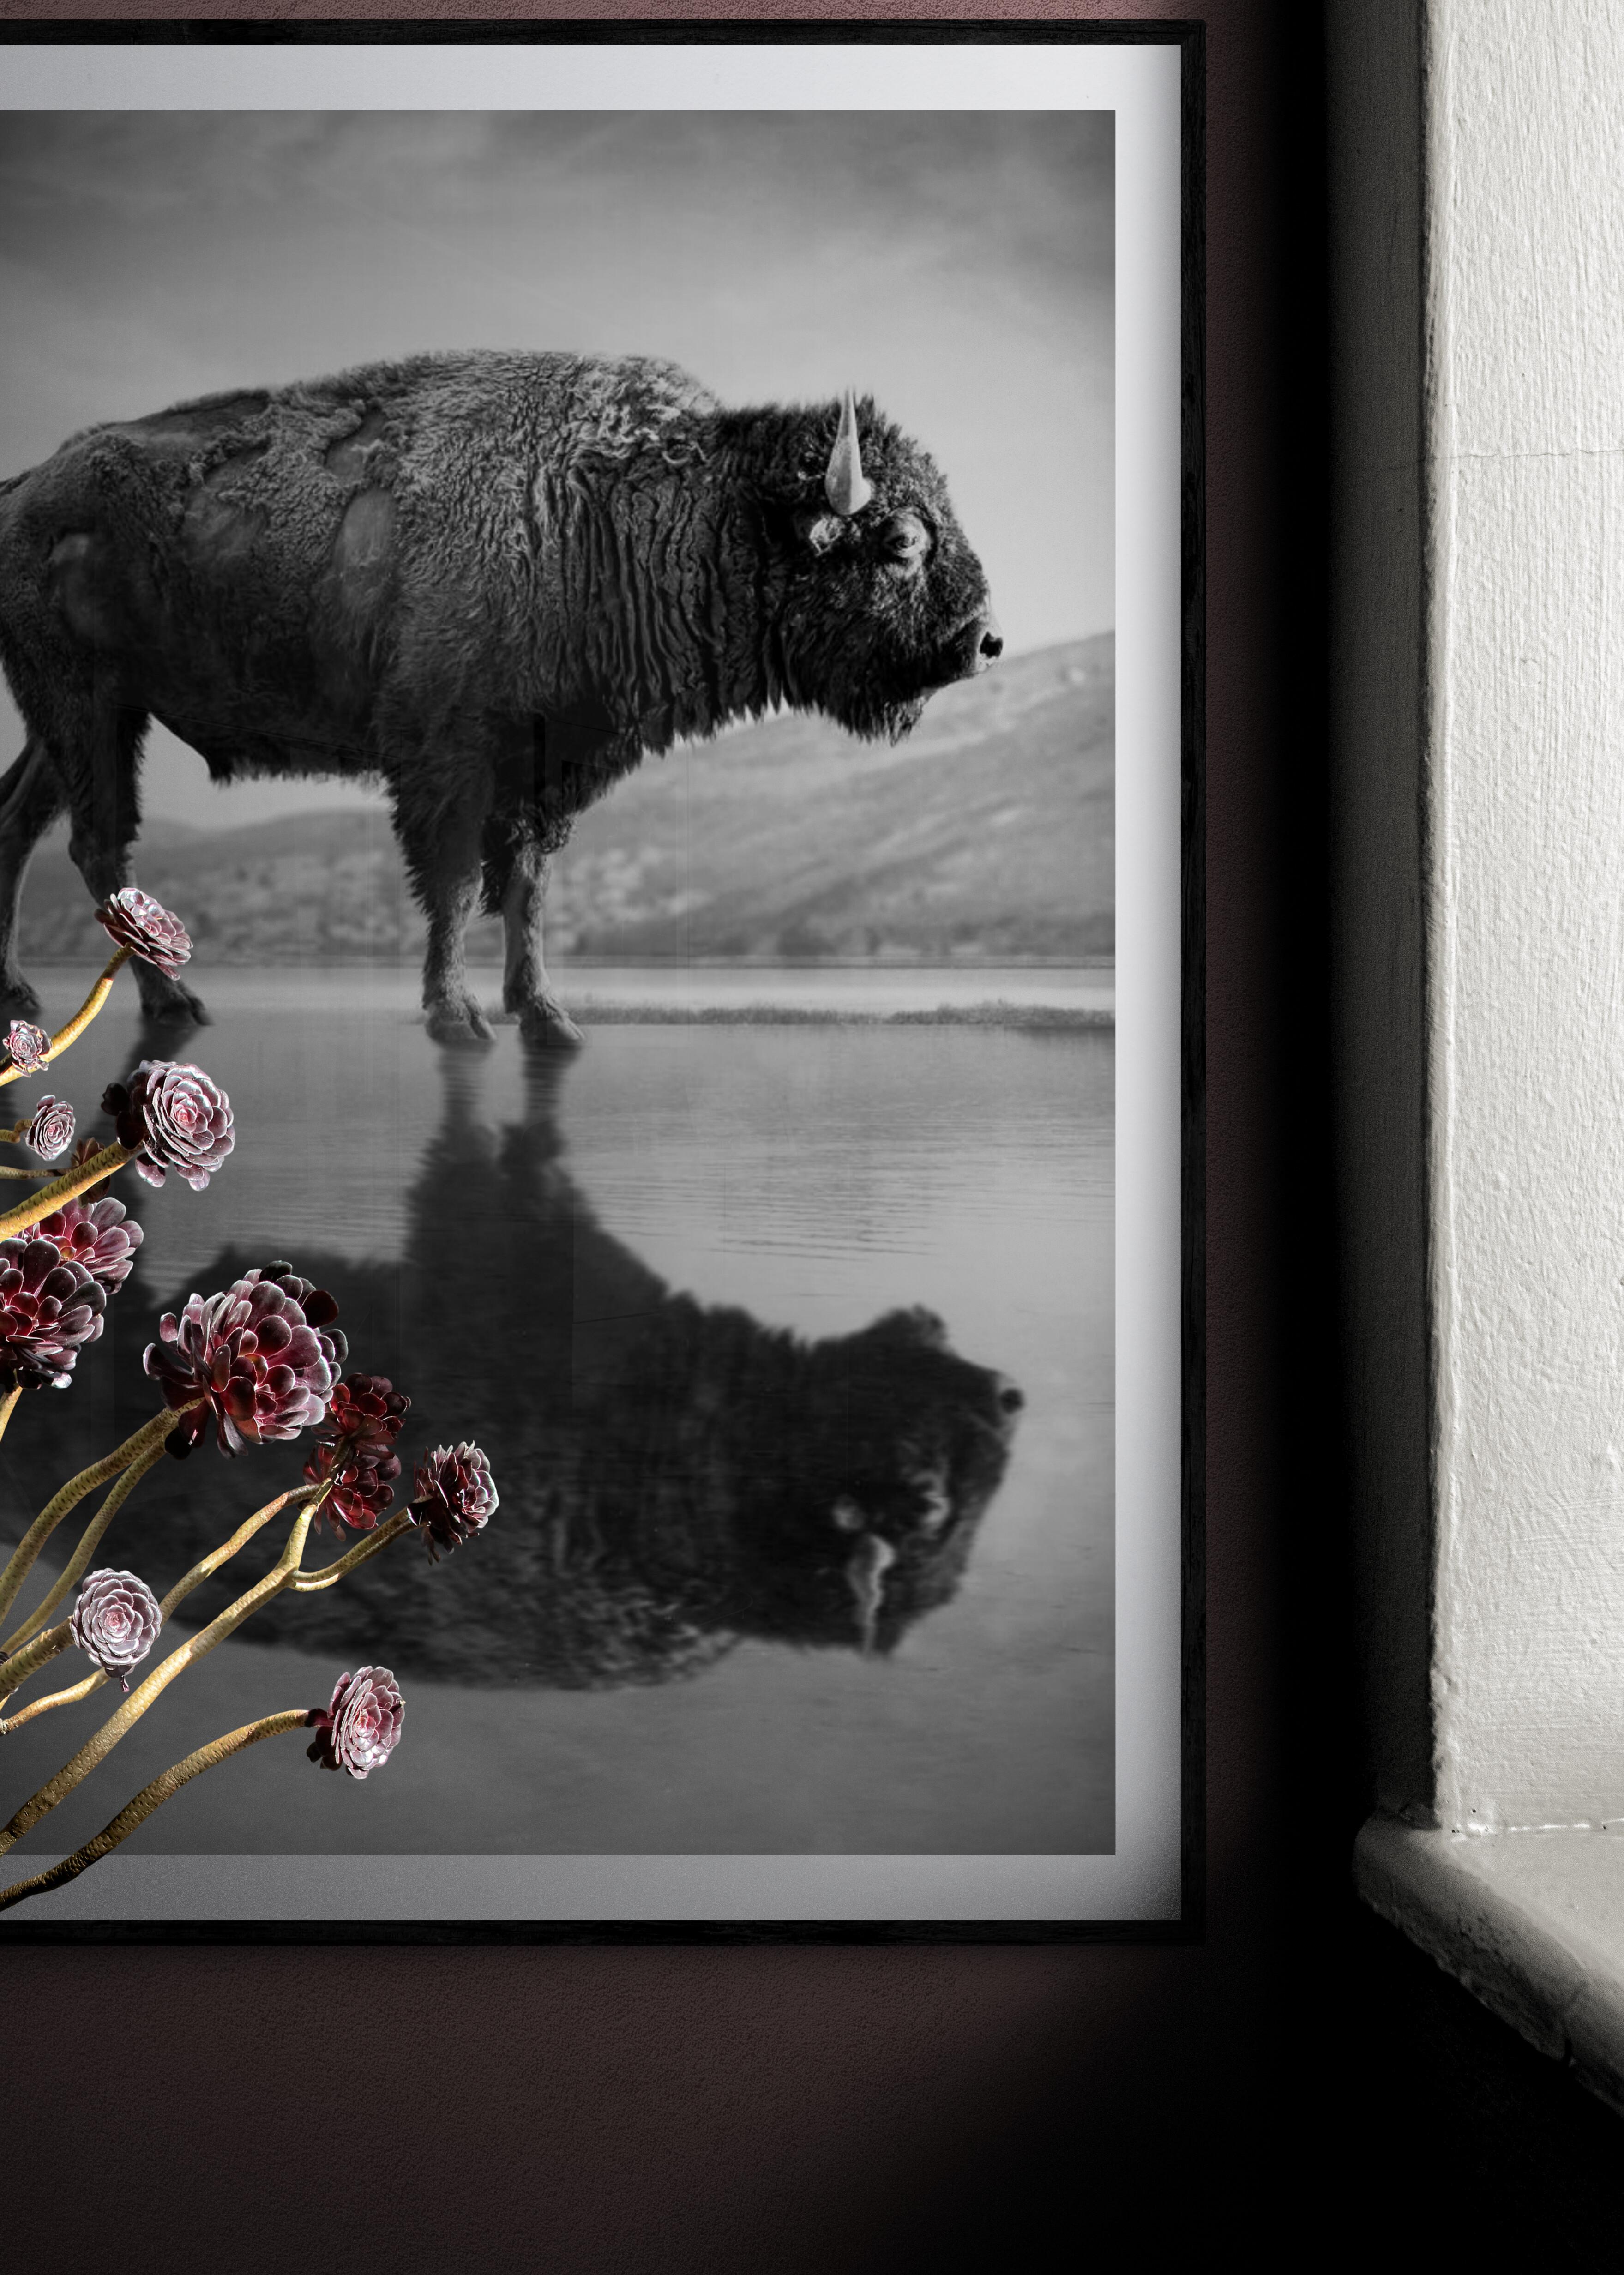 This is a contemporary photograph of an American Bison. 
Printed on archival paper and using archival inks
Framing available. Inquire for rates. 

This print is a signed A/P (Artist Proof) on glossy paper. 
1 of 4

Shane Russeck has built a